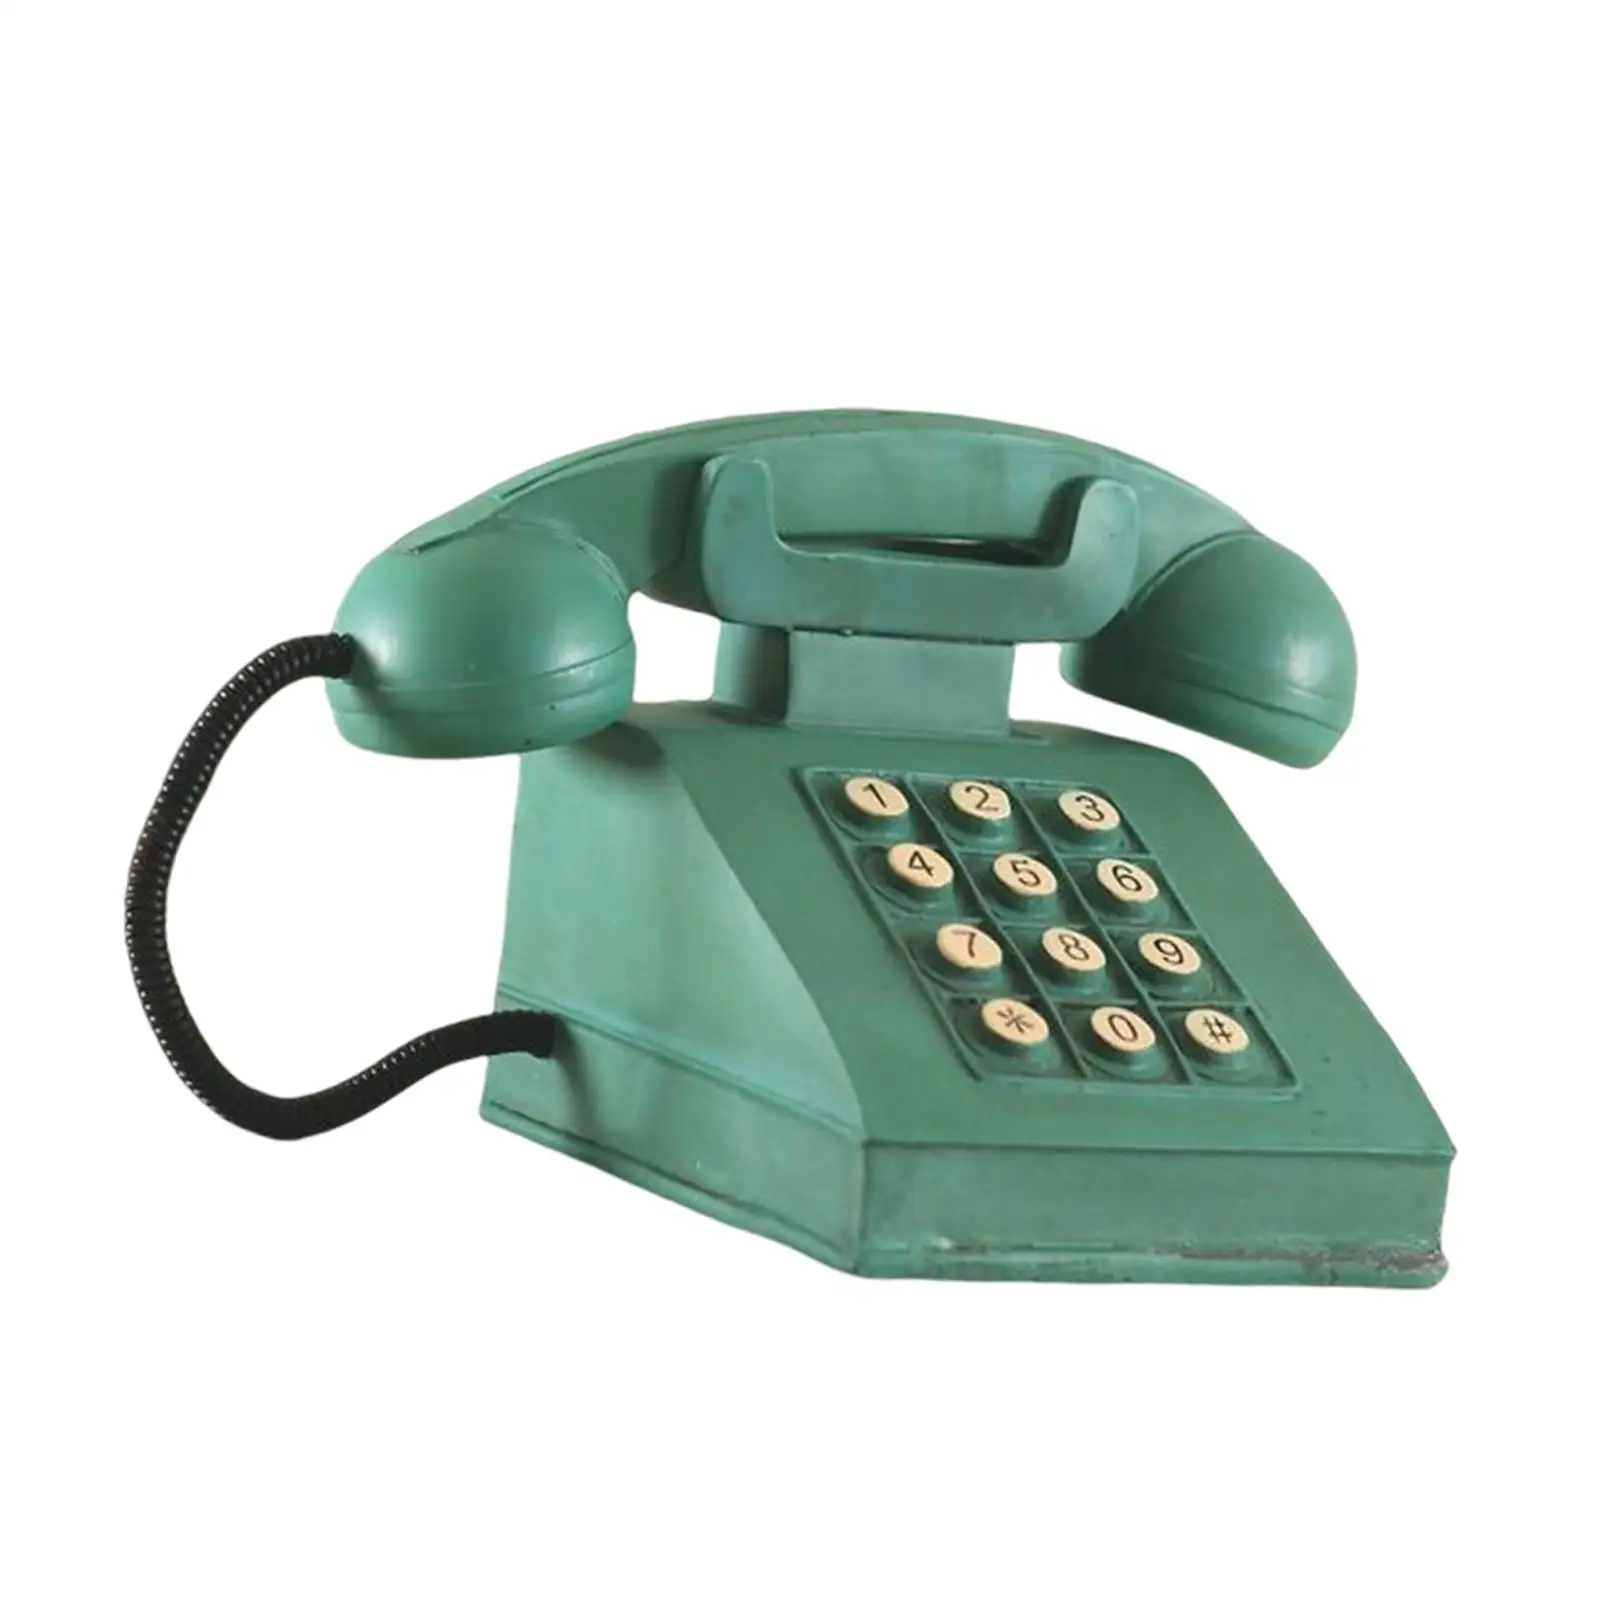 Retro Style American Telephone Model Figurine for Tabletop Store Decoration